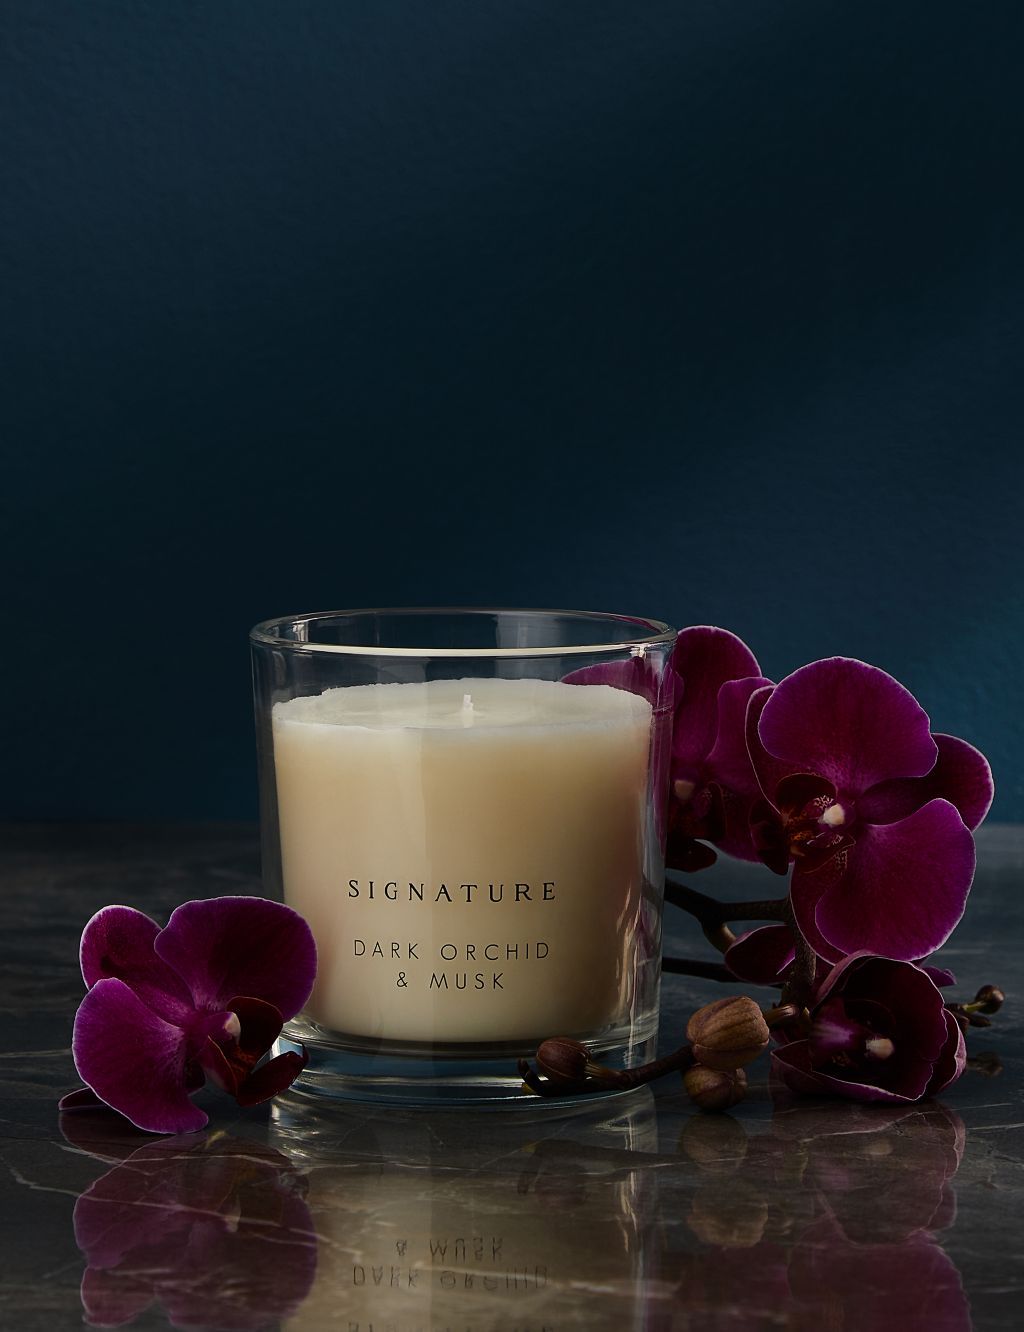 Dark Orchid & Musk Boxed Candle image 2